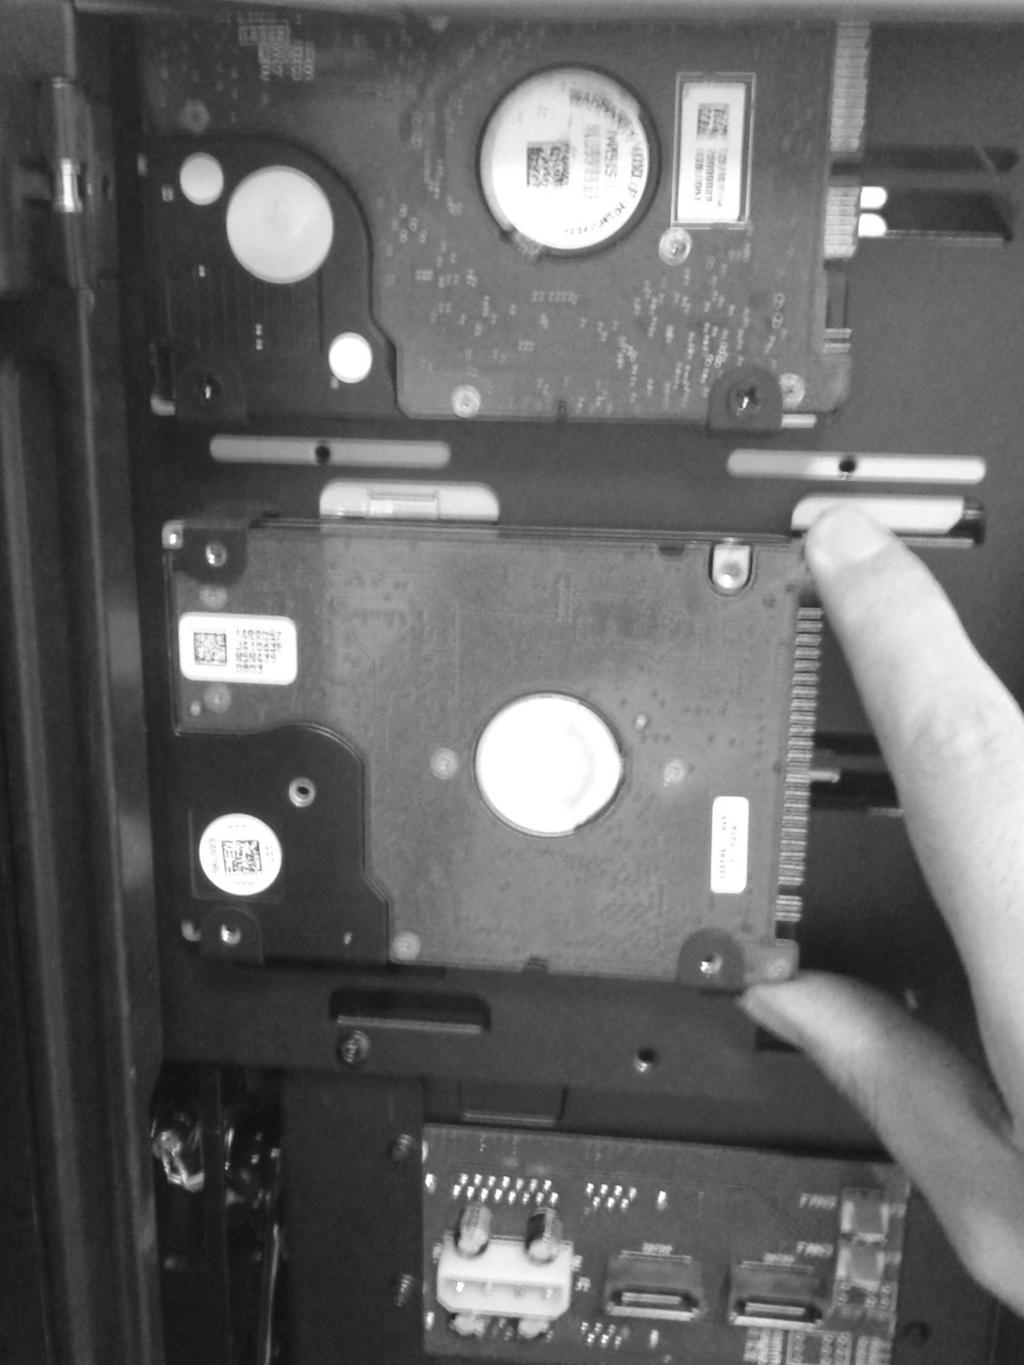 Two HDDs/SSDs on the side of the 5,25 drive cage and